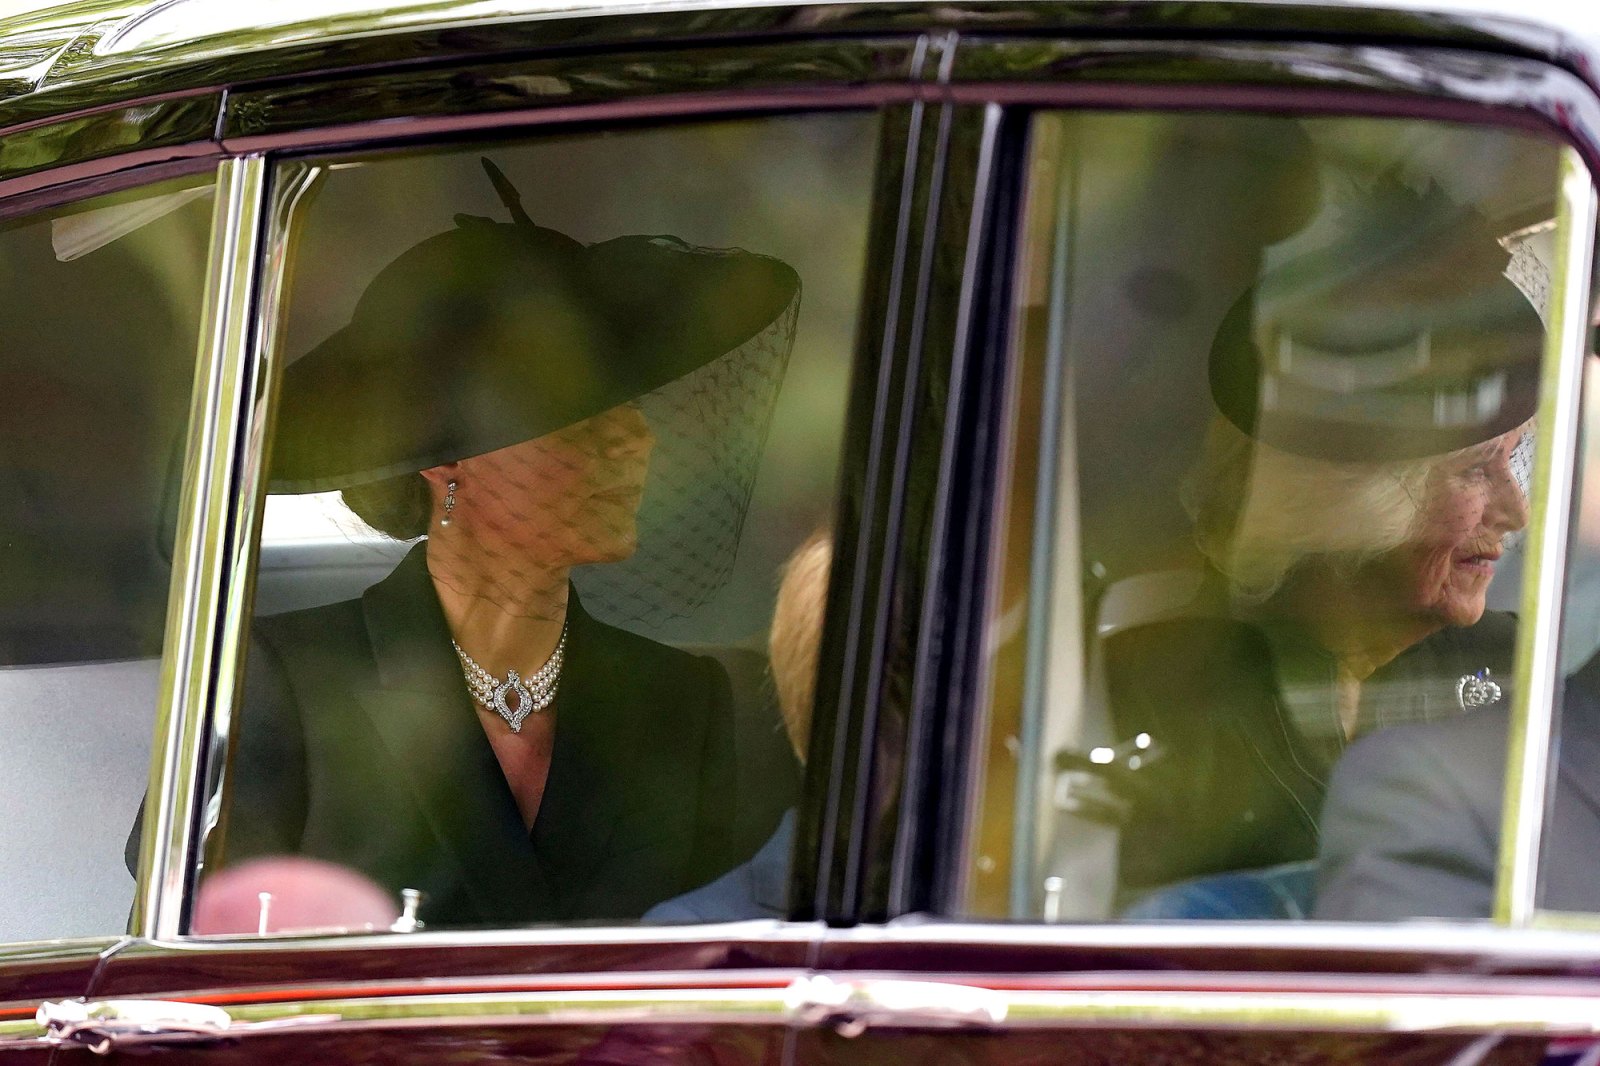 Camilla and Kate Wear Veils to Funeral